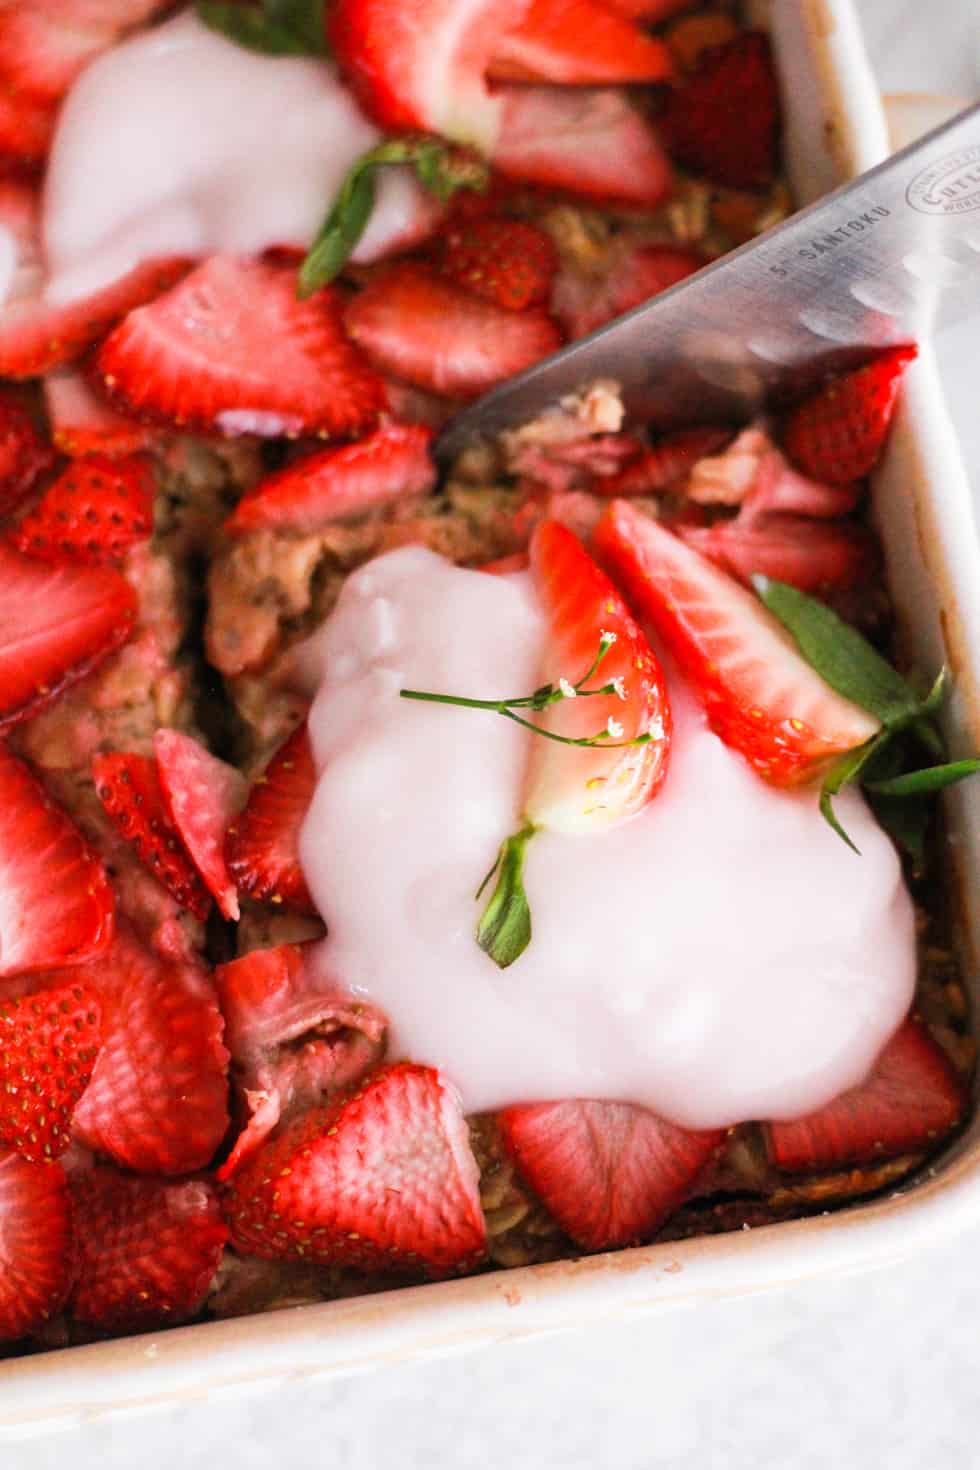 Closeup shot of knife cutting into strawberry baked oatmeal.